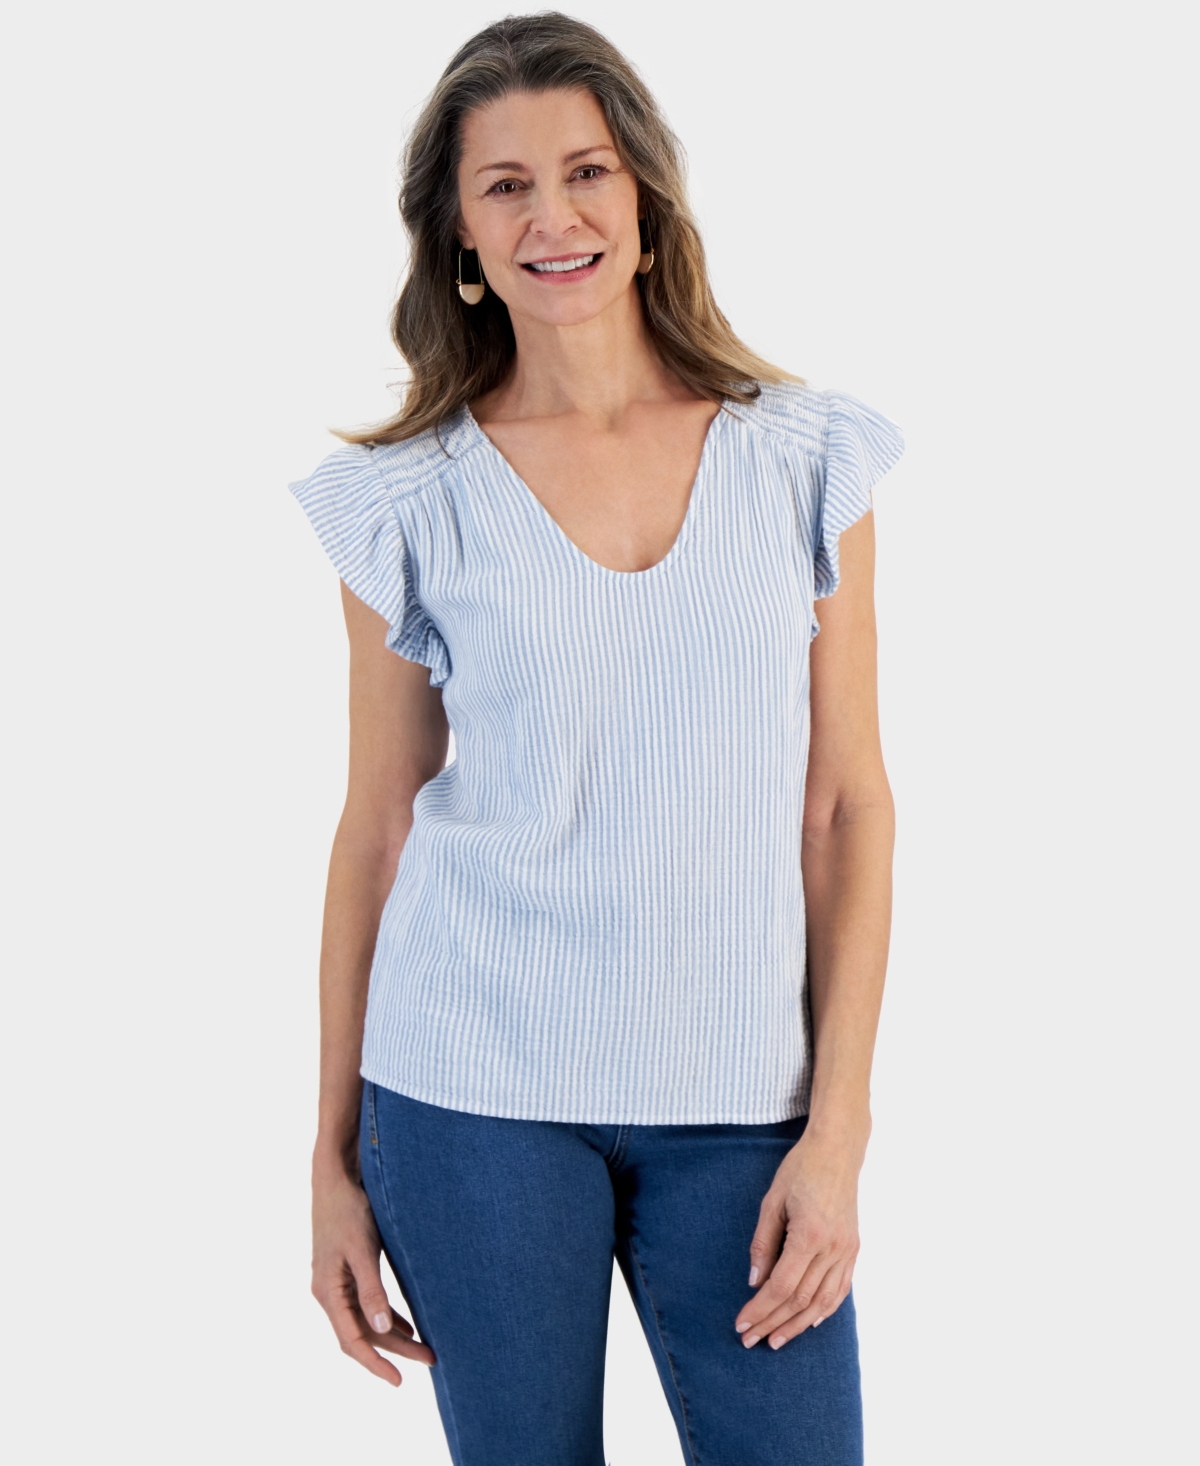 Women's Printed Cotton Gauze Flutter Sleeve Top, Created for Macy's - Multi Stripe